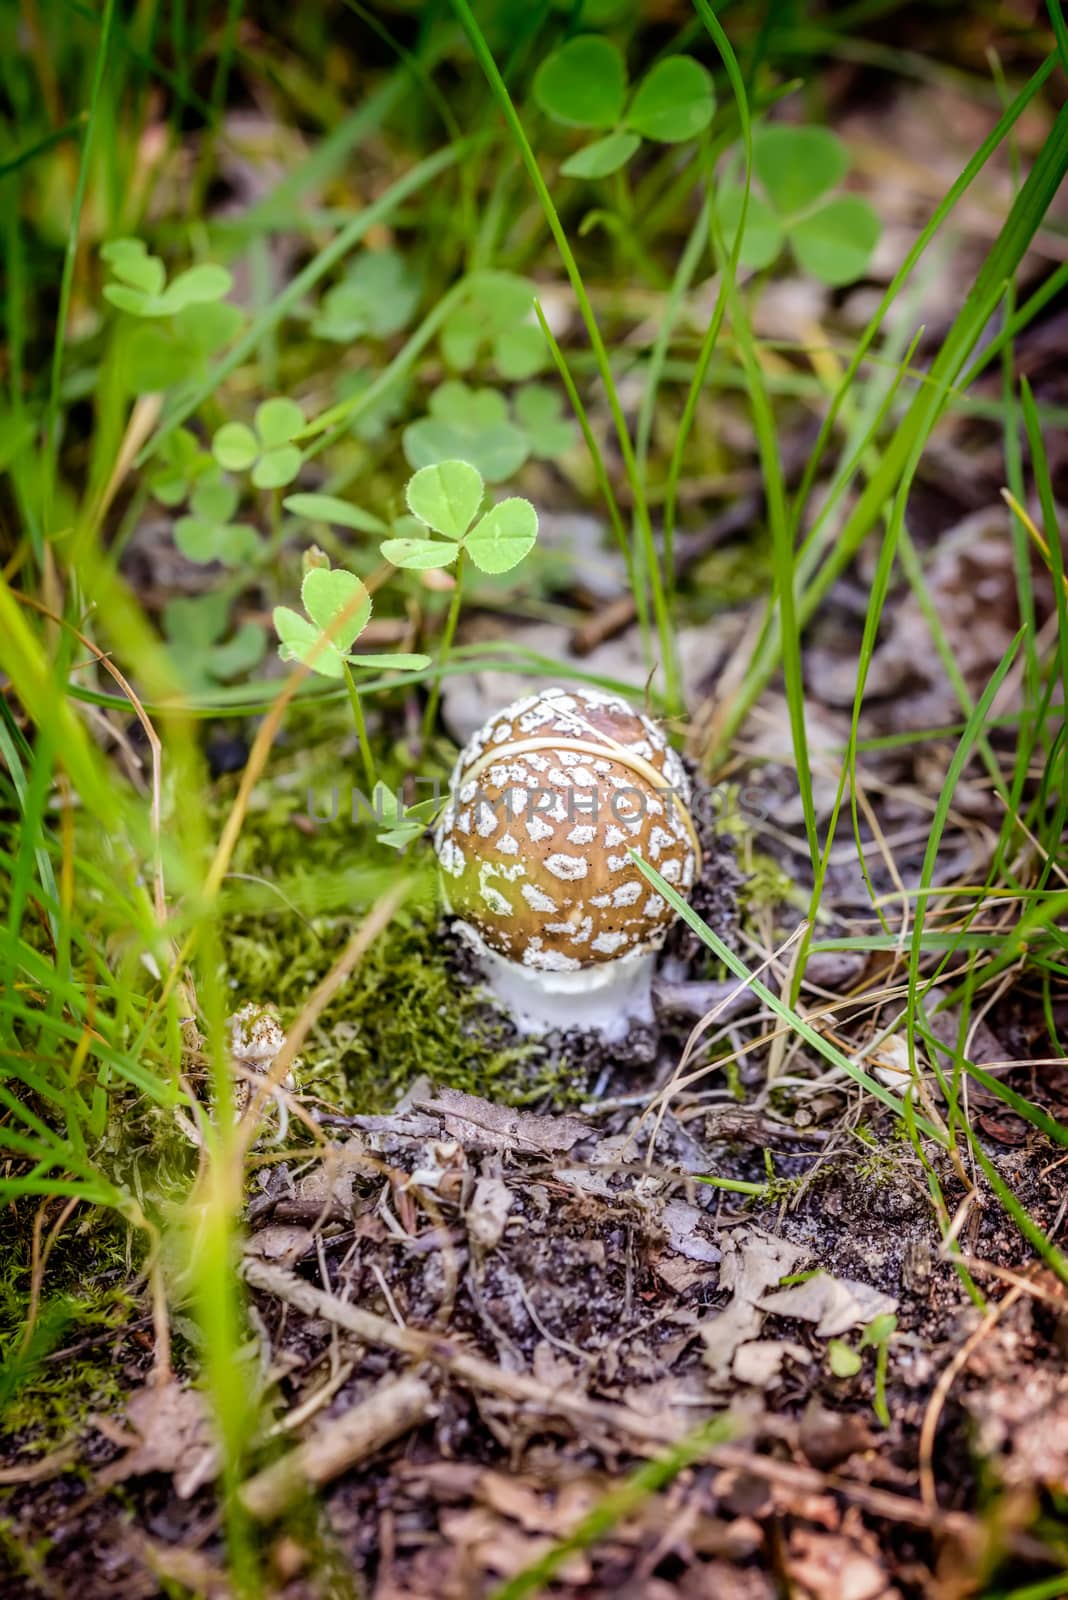 A young Amanita Pantherina, also called panther cap or false blusher, hidden under the autumns leaves in a woods' natural ambient under the warm spring sun